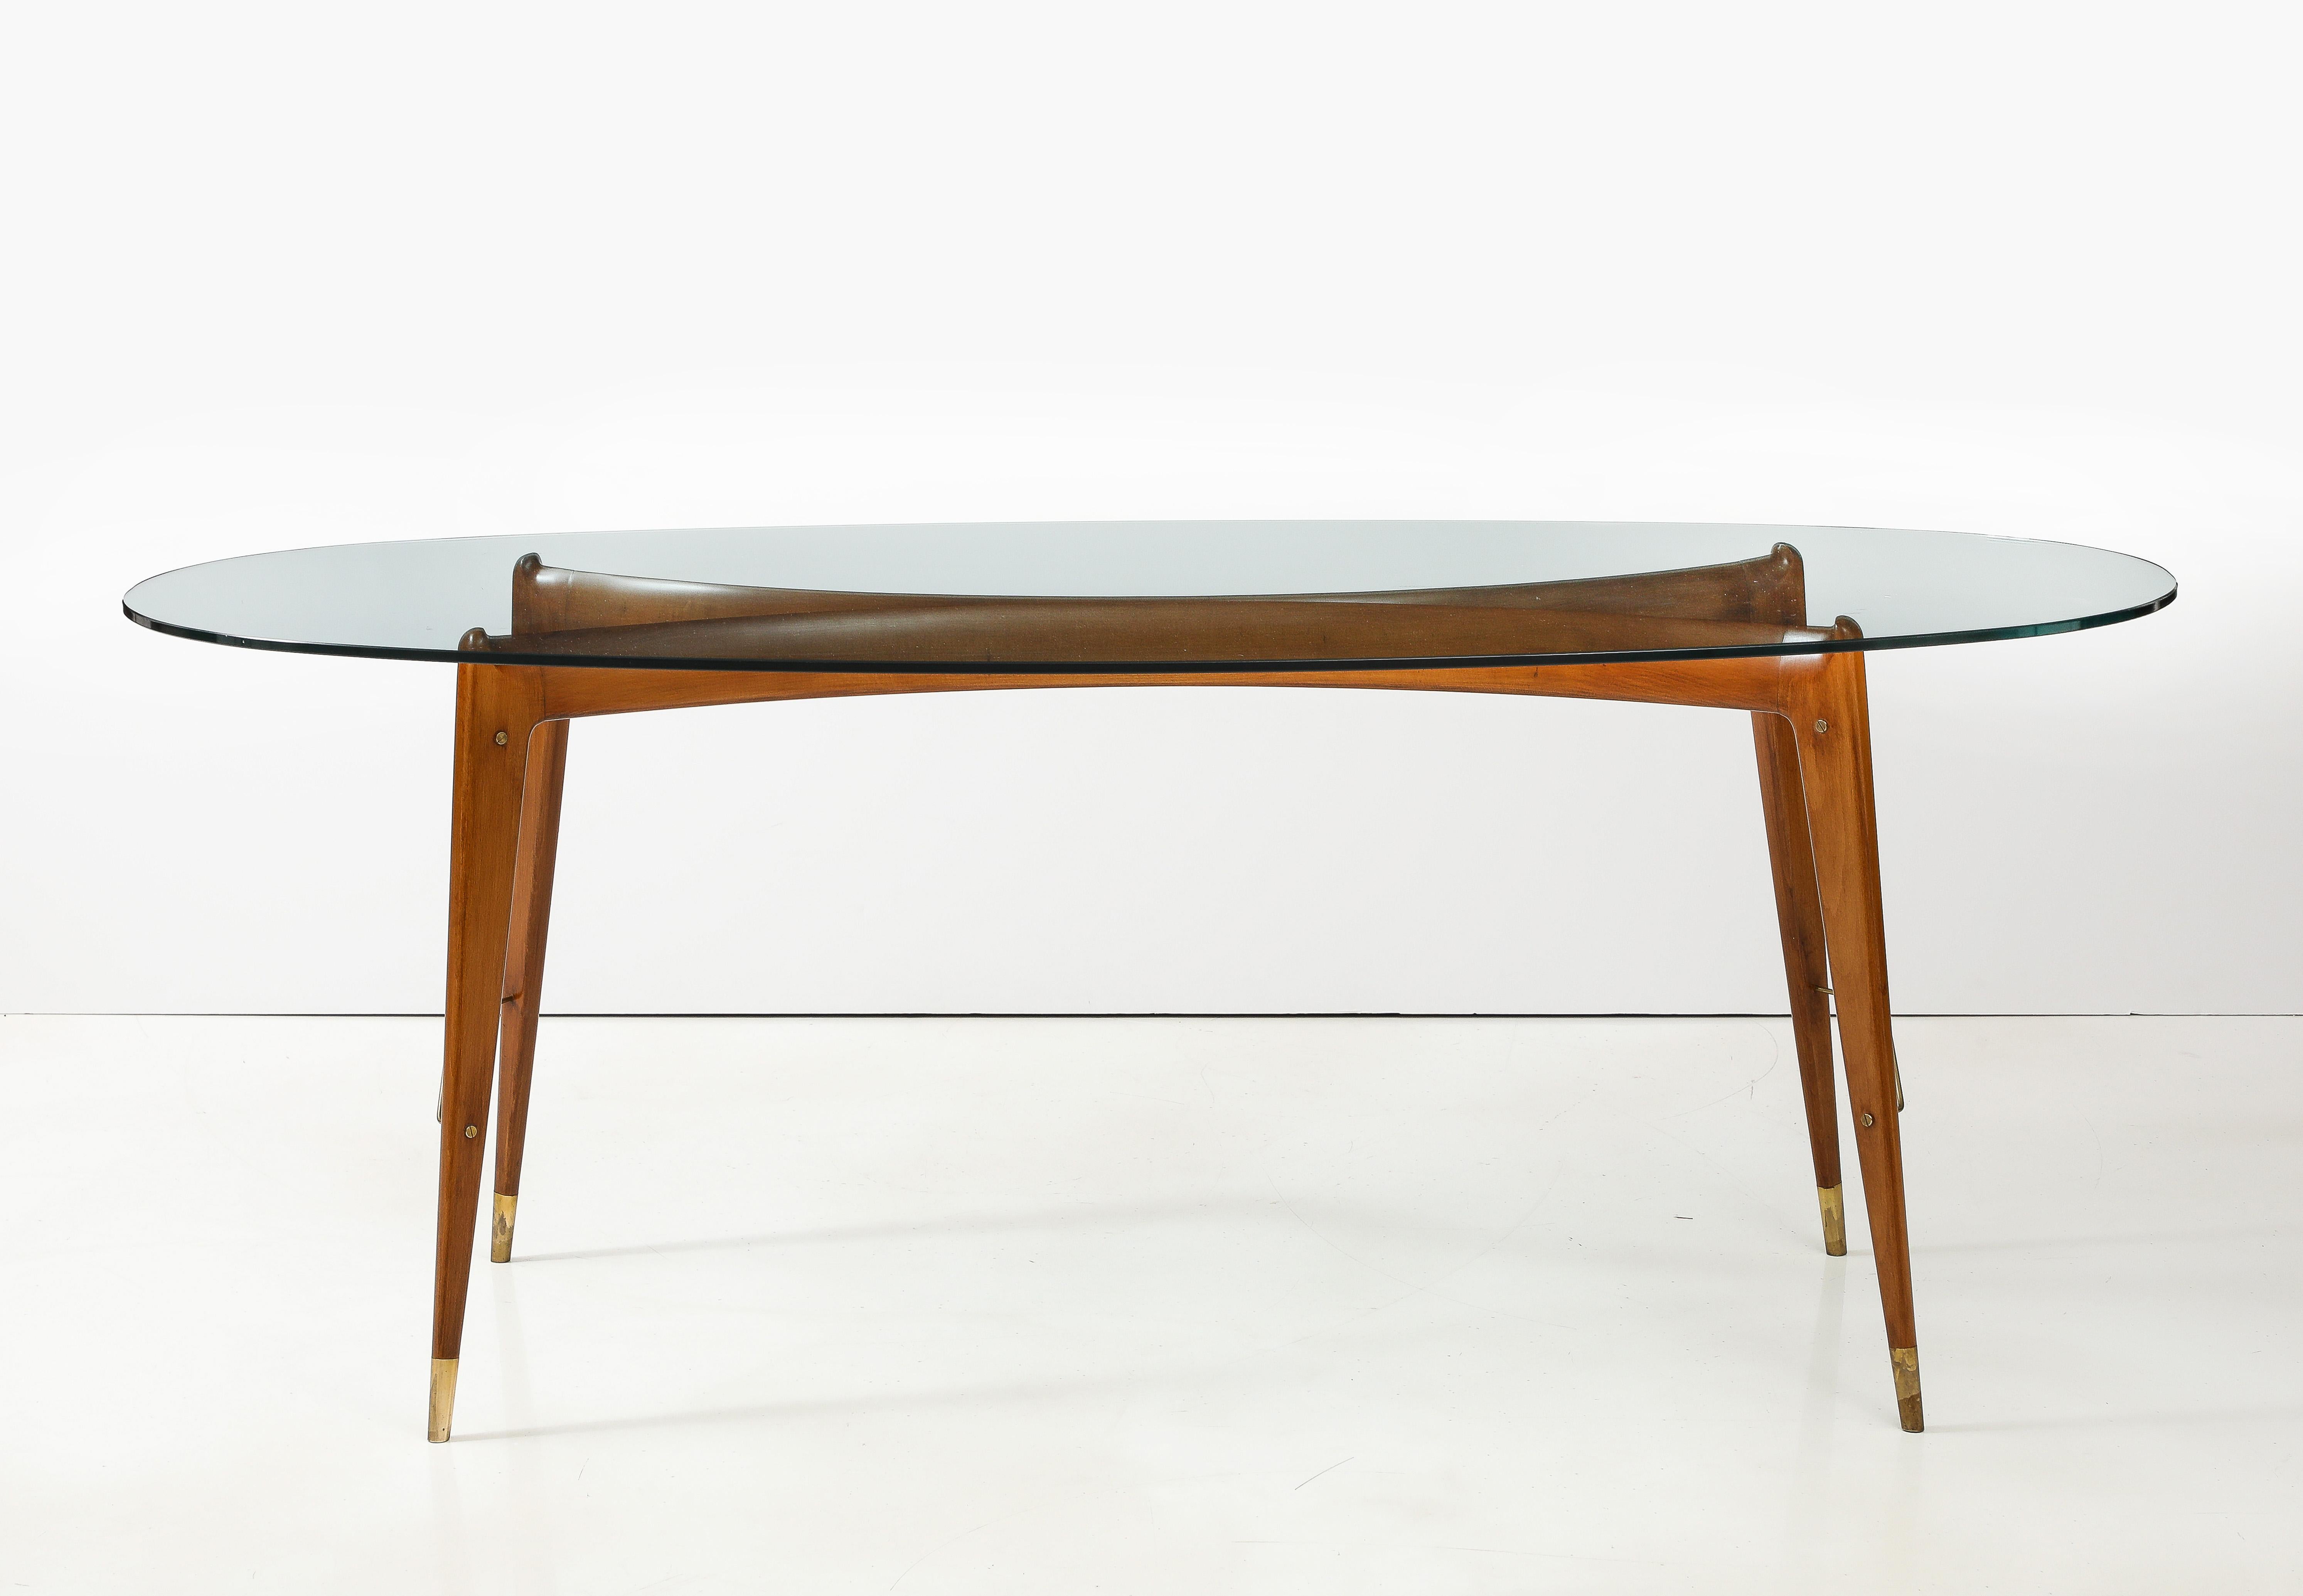 Italian 1950's Ico Parisi Attributed Sculptural Cherrywood And Brass Dining Table For Sale